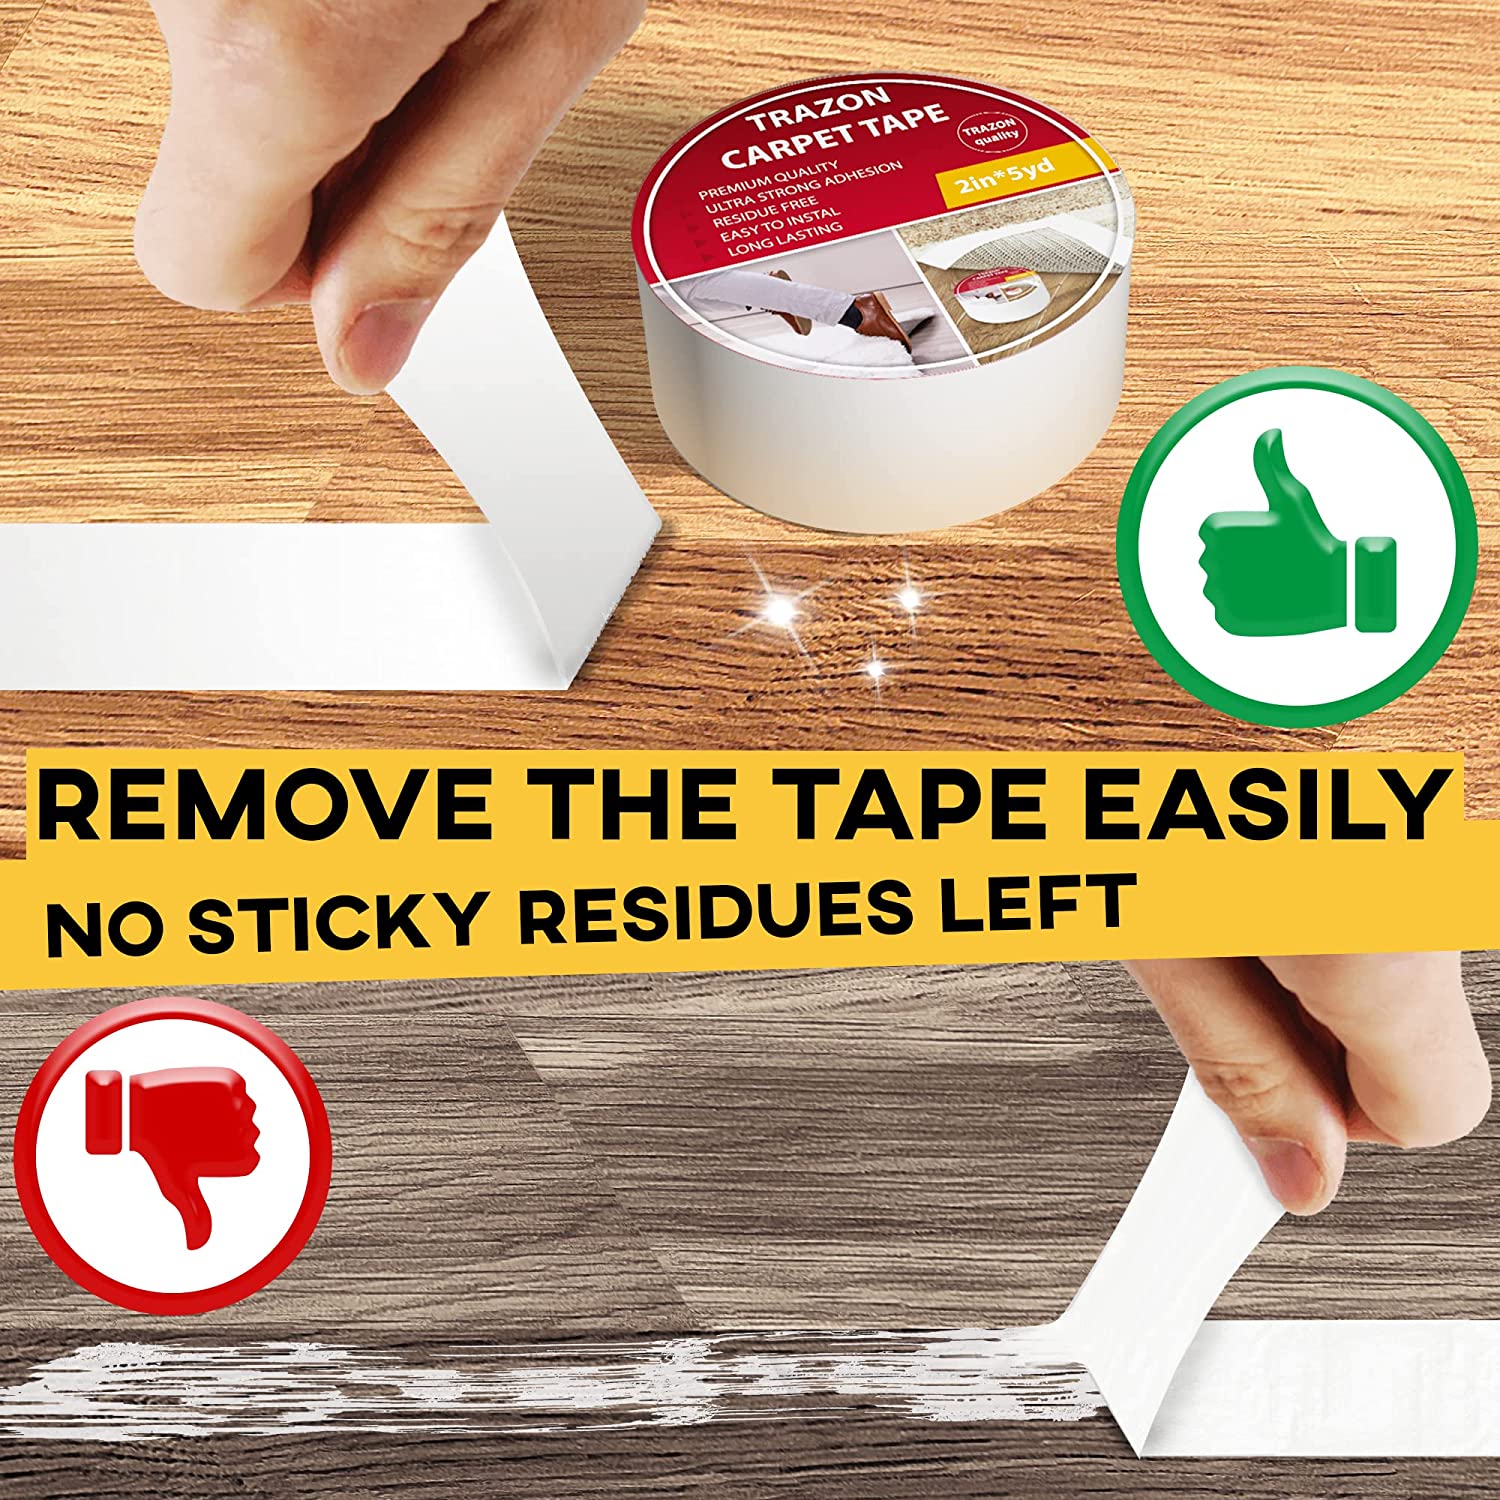 5M Double Sided Carpet Tape Heavy Duty for Area Rugs,Tile Hardwood Floors,Over  Carpet,Rug Tape High Adhesive and Removable - AliExpress